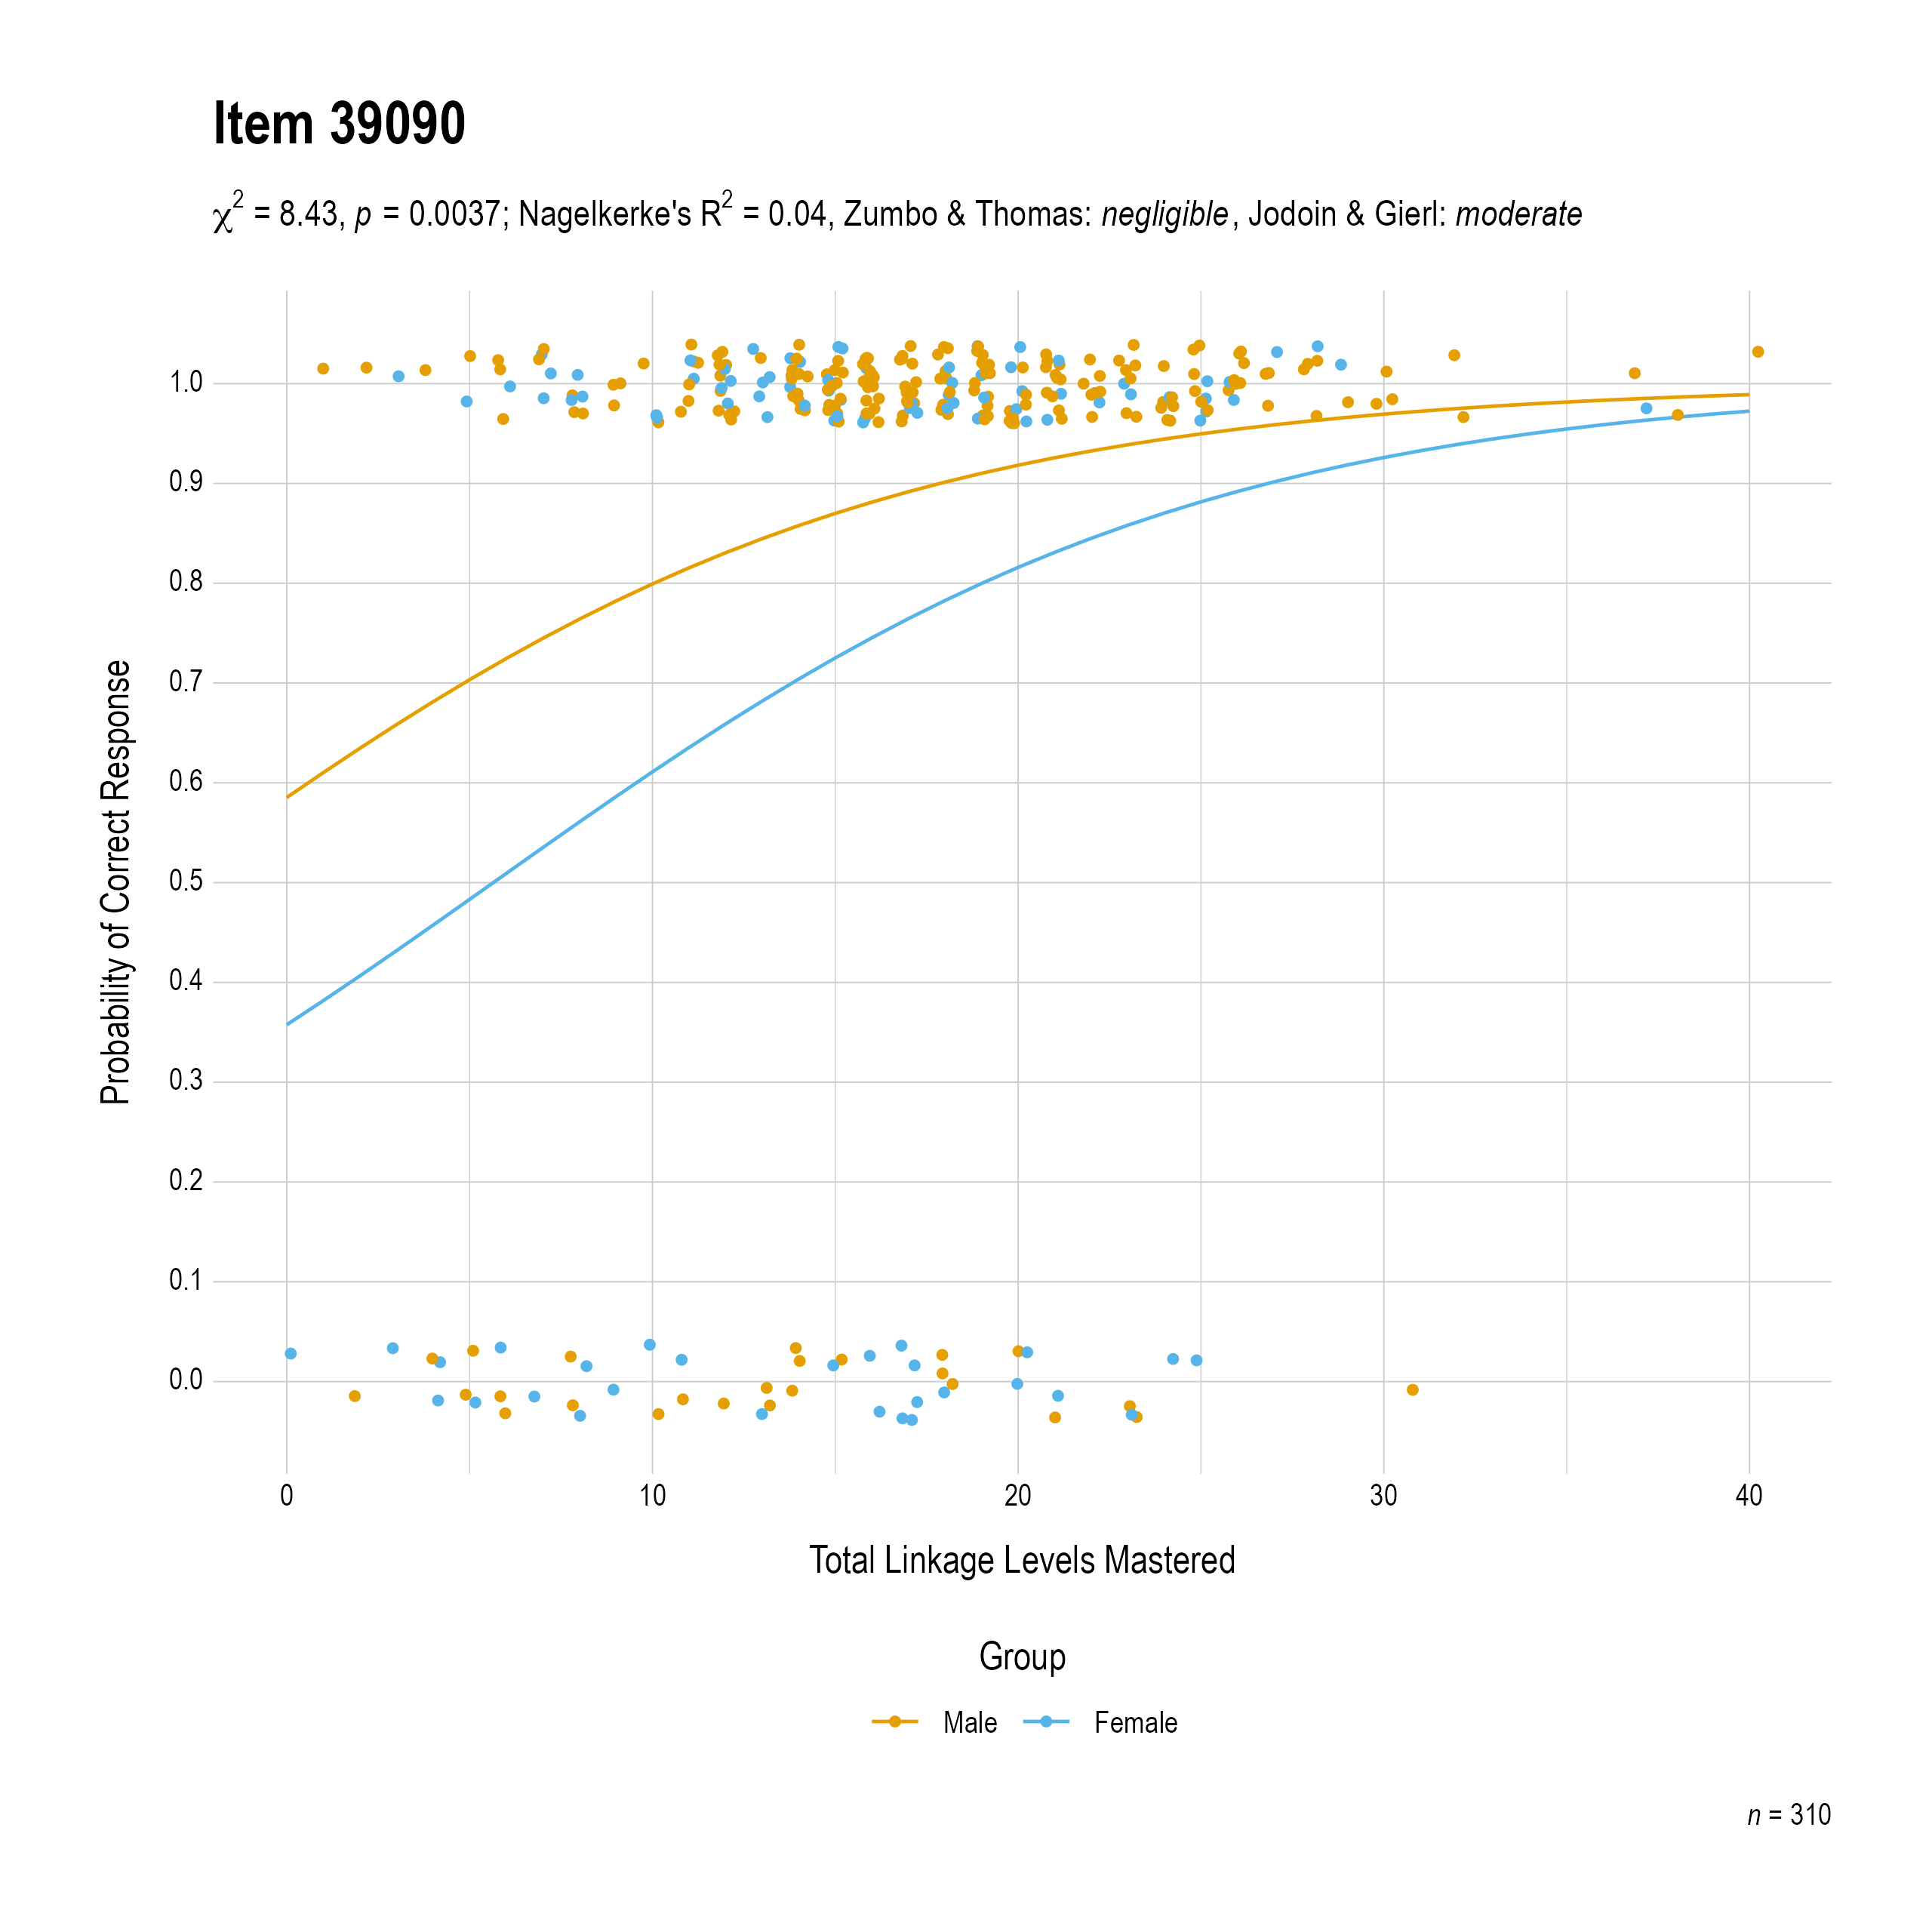 The plot of the uniform gender differential item function evidence for Mathematics item 39090. The figure contains points shaded by group. The figure also contains a logistic regression curve for each group. The total linkage levels mastered in is on the x-axis, and the probability of a correct response is on the y-axis.